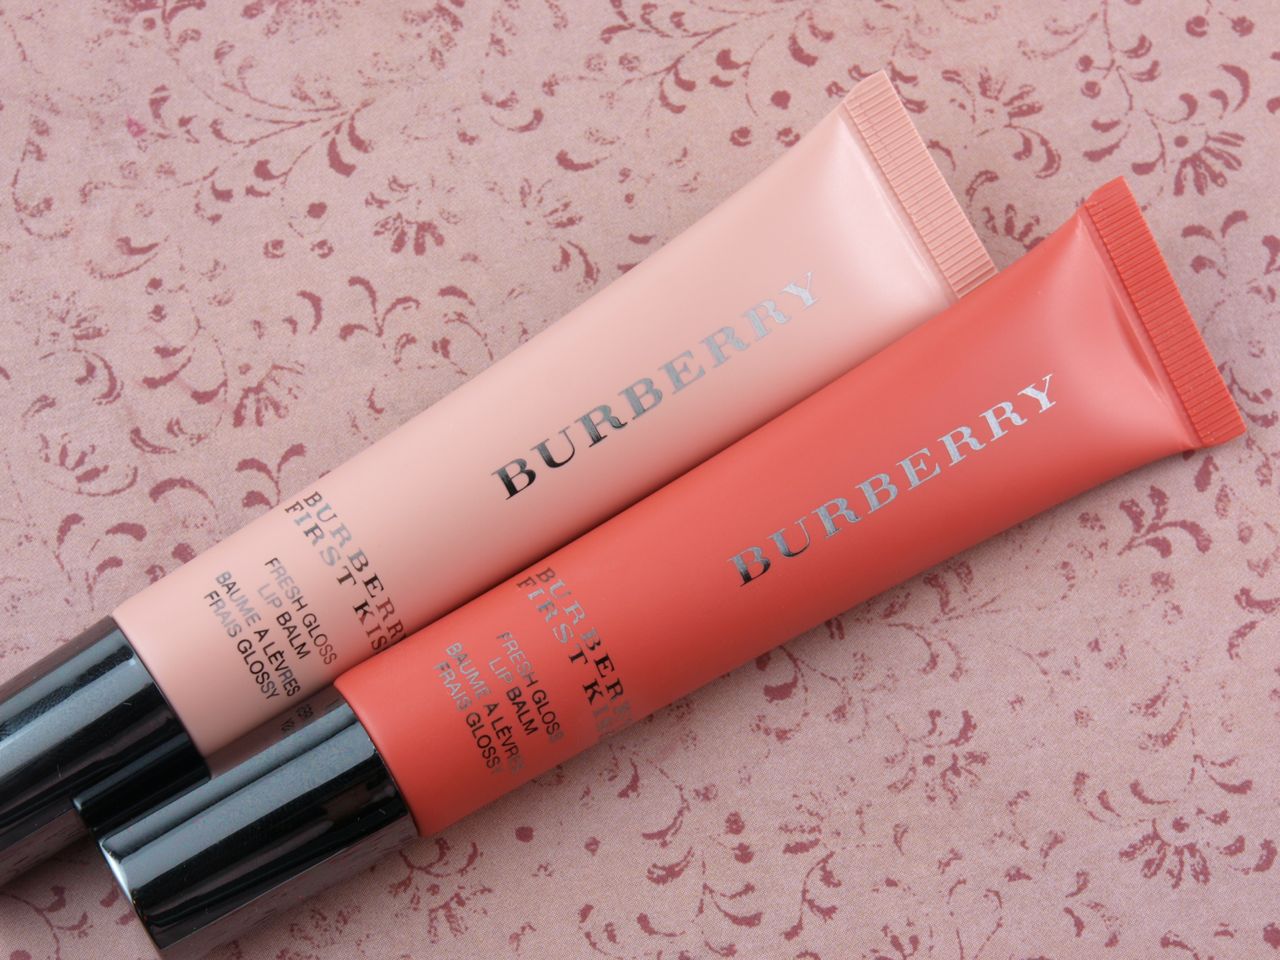 Duke loop værtinde Burberry First Kiss Fresh Gloss Lip Balm in "01 Soft Peach" &"02 Coral  Glow": Review and Swatches | The Happy Sloths: Beauty, Makeup, and Skincare  Blog with Reviews and Swatches